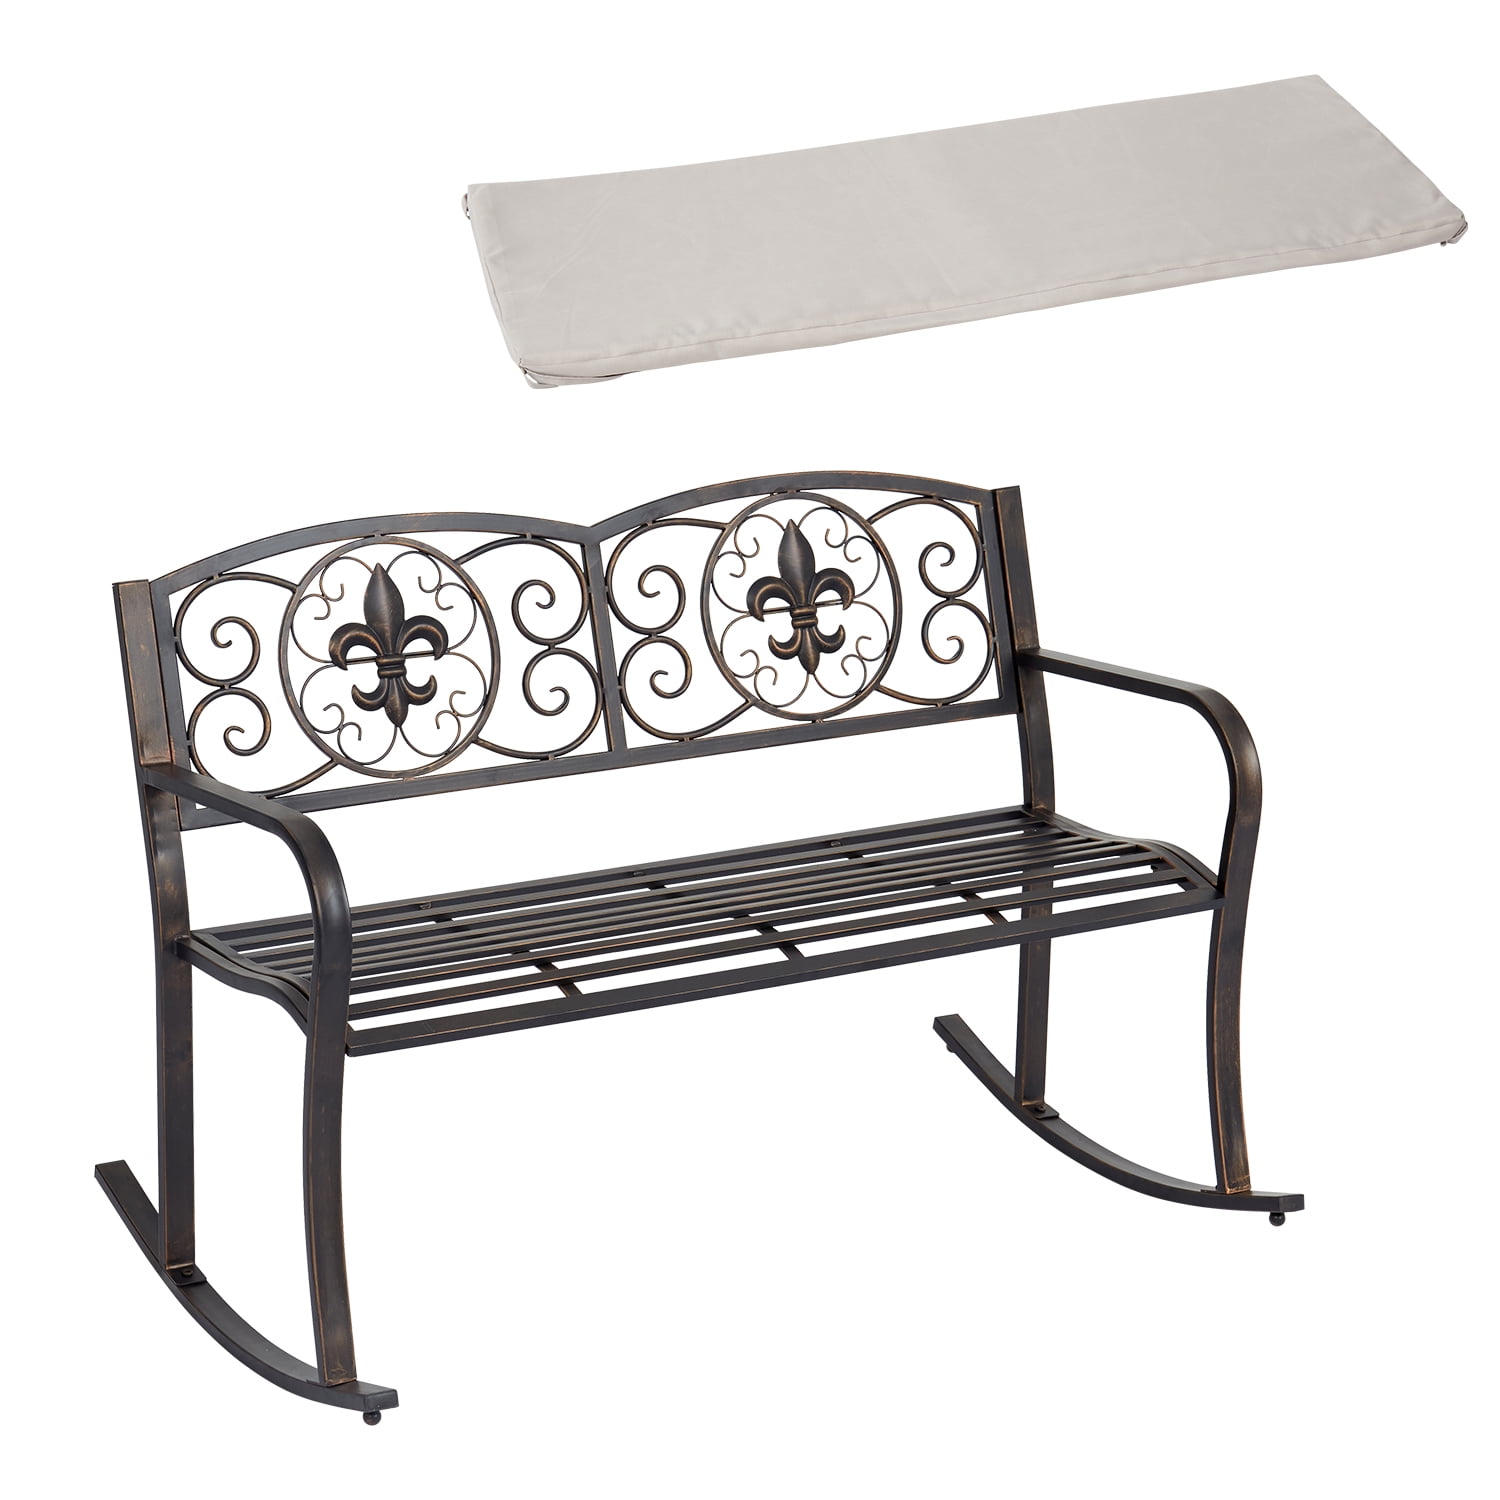 Kinbor 50” Outdoor Garden Benches 2 Person Patio Metal Rocking Bench with  Cushion, Double Rocker Rocking Chair for Deck Balcony 